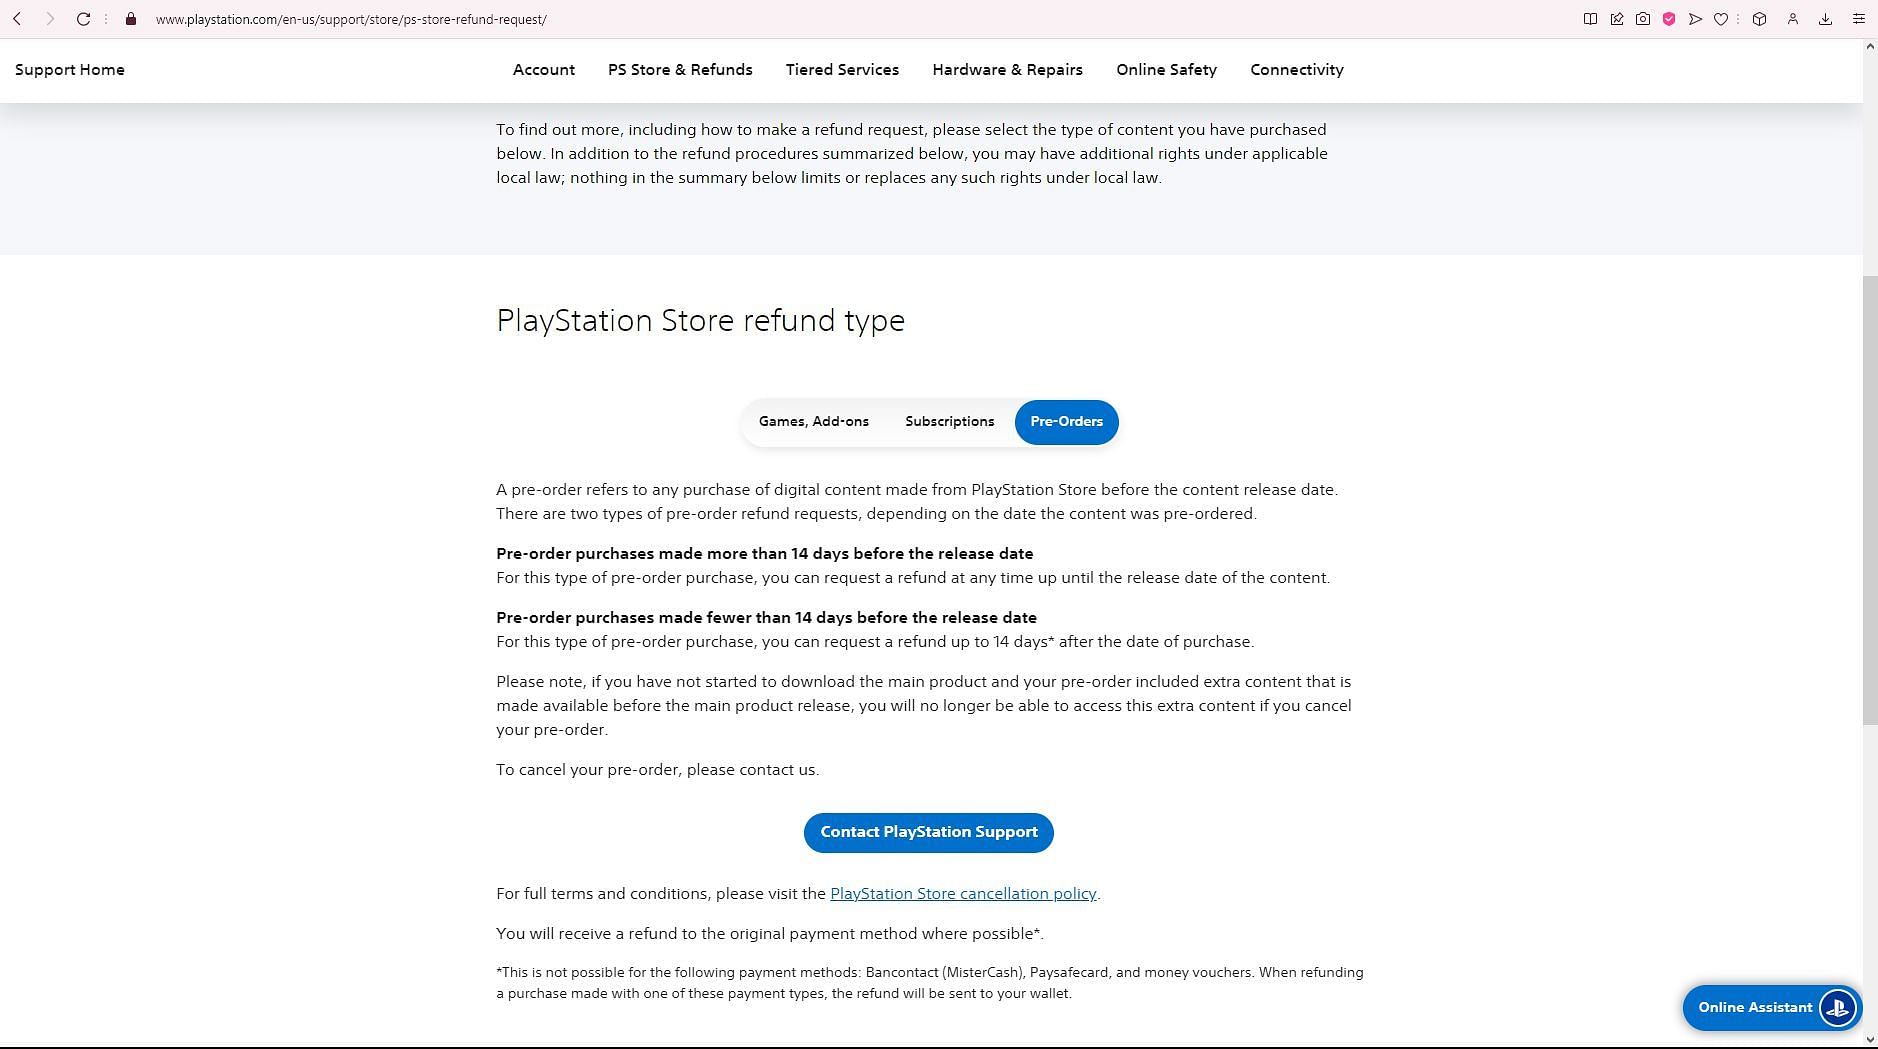 PS Store & Refunds